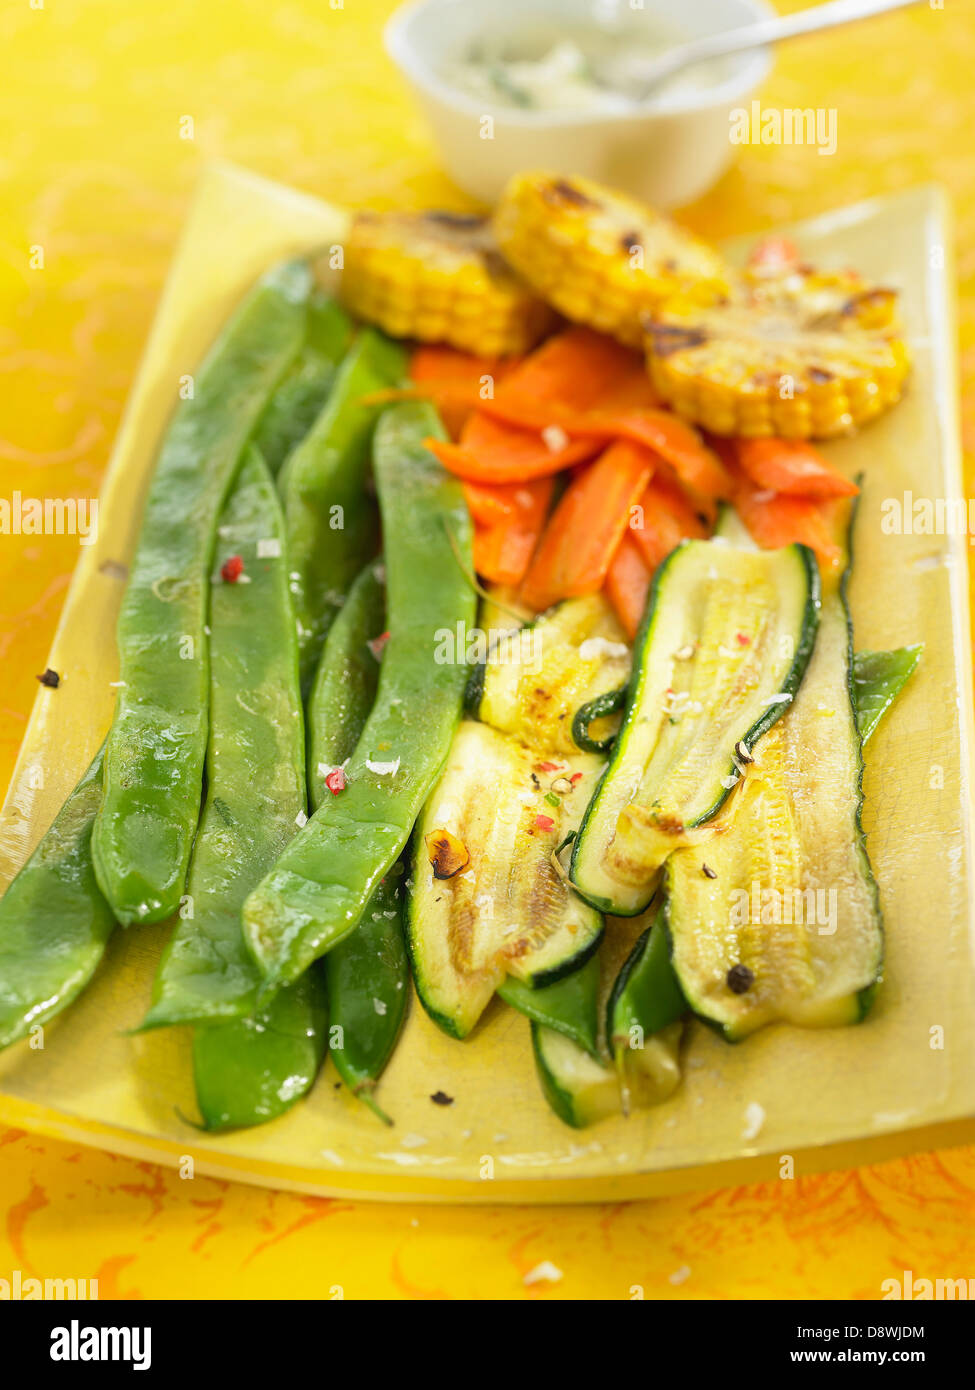 Selection of grilled vegetables Stock Photo